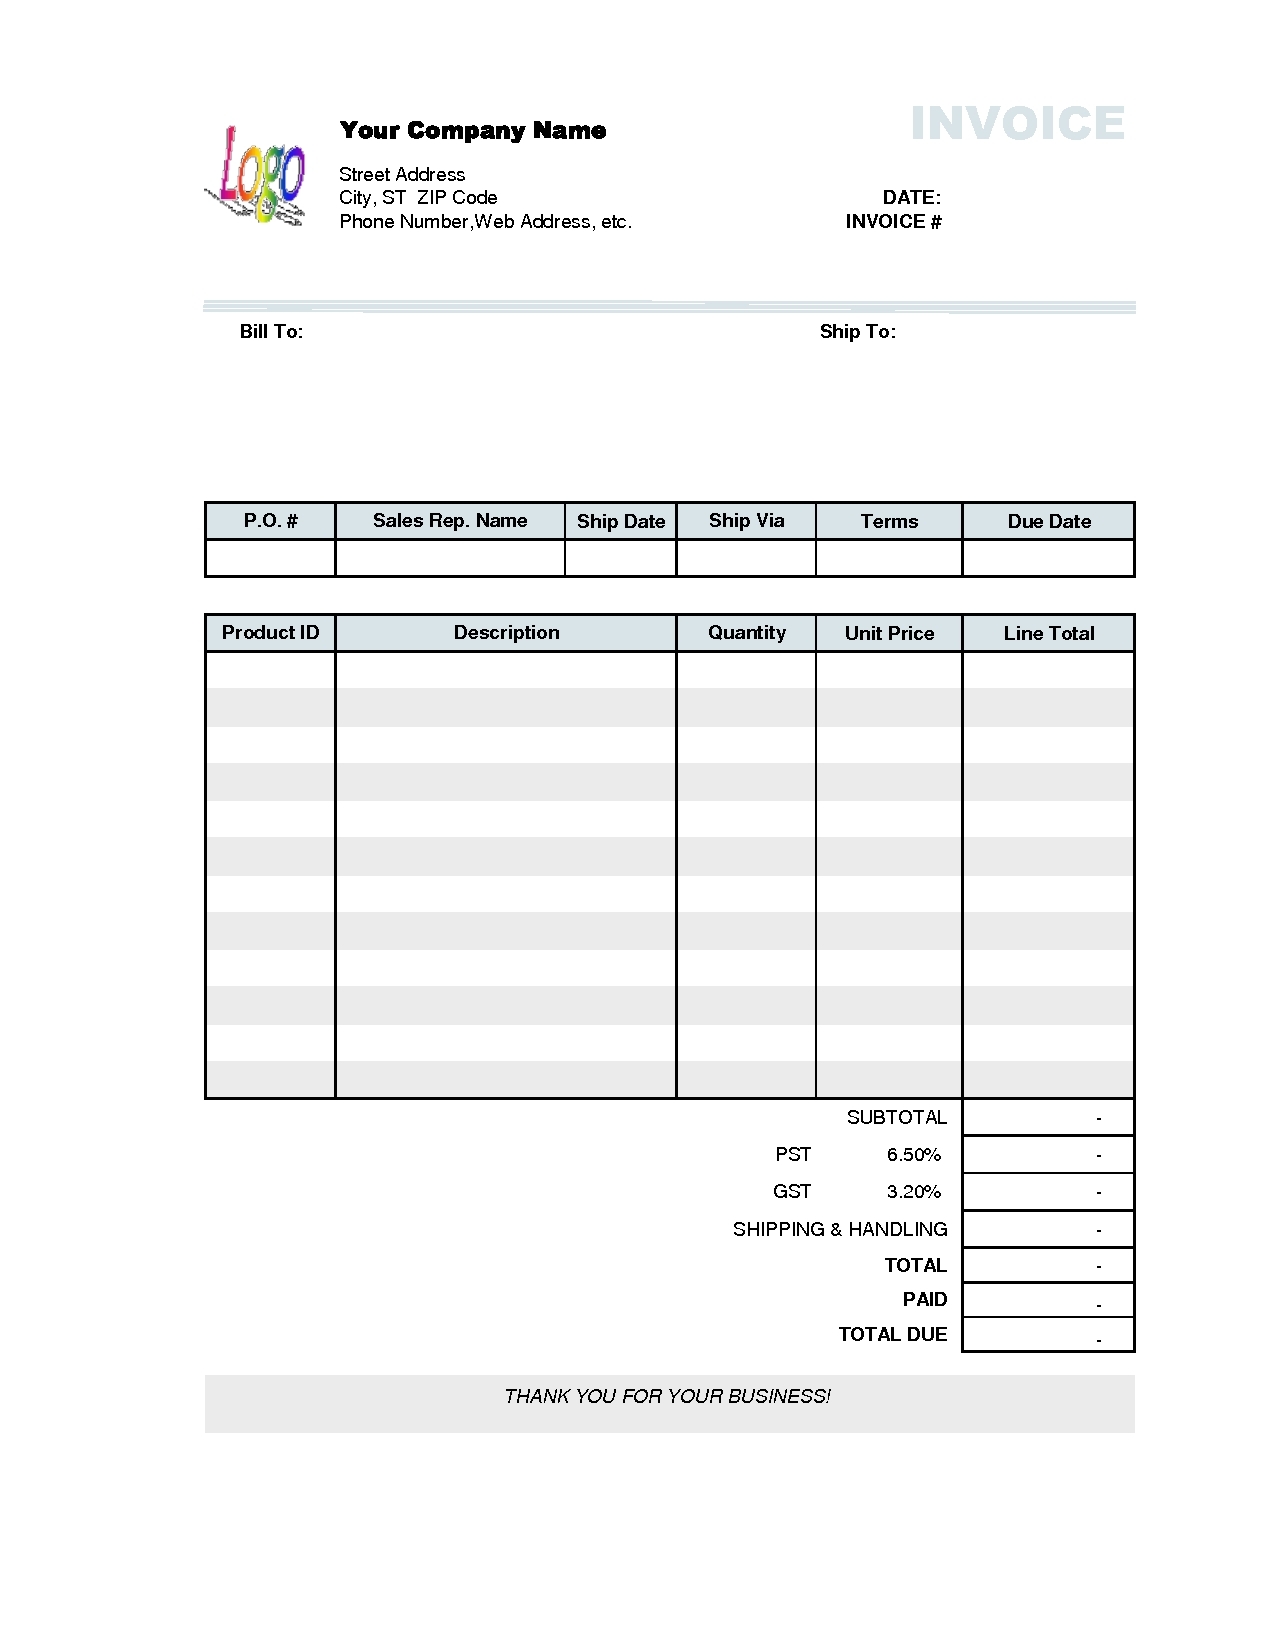 types-of-invoices-invoice-template-ideas